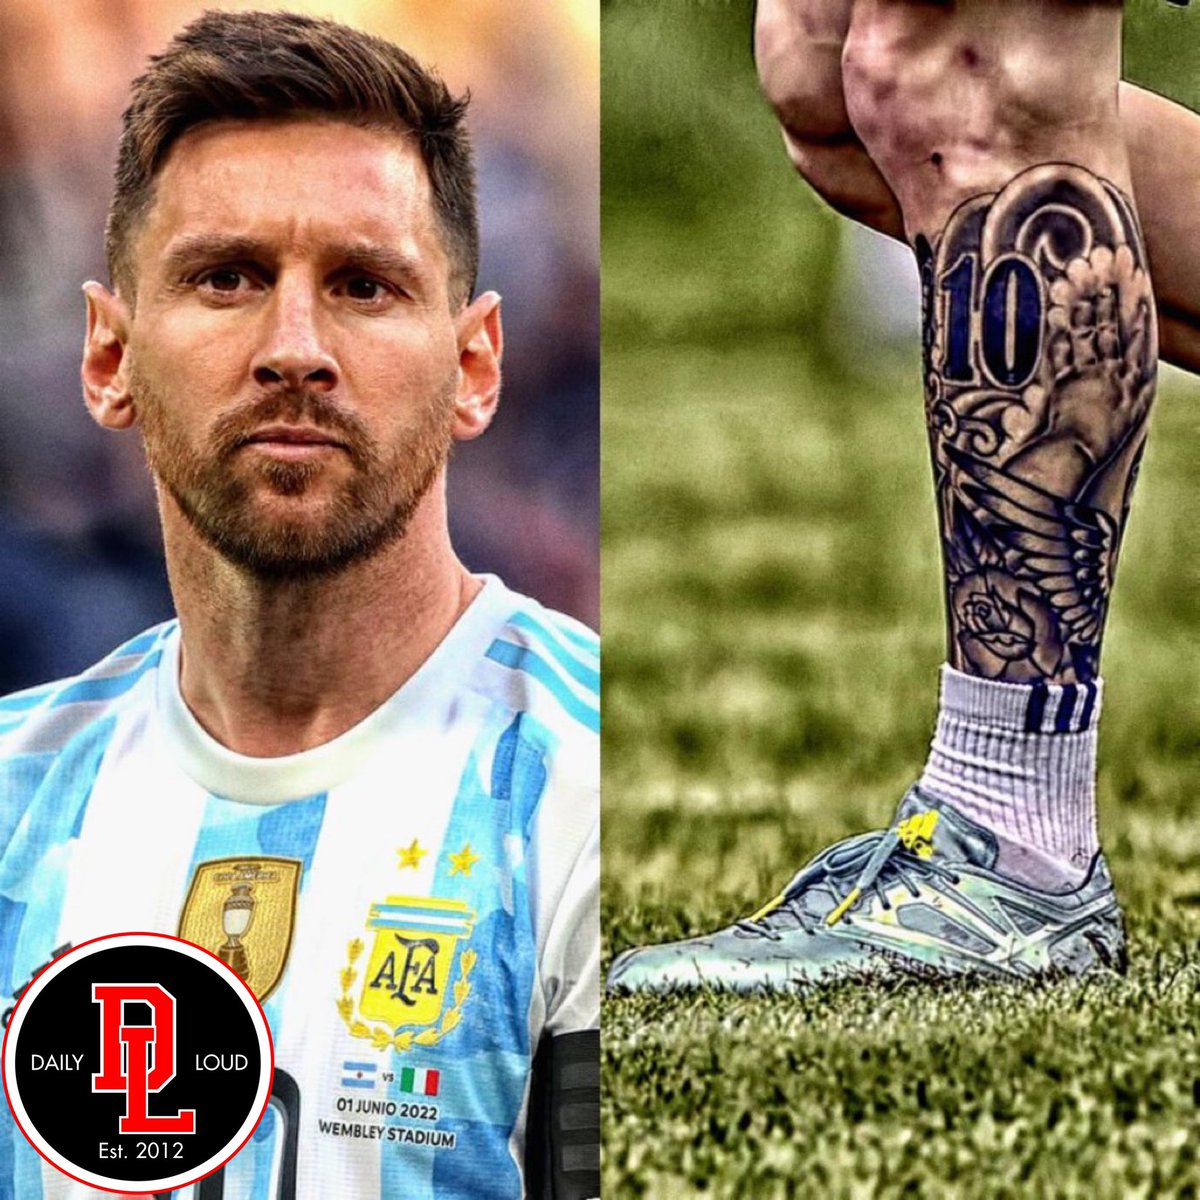 Lionel Messi has the most expensive insurance among all the football players. His left foot alone is insured for $900 Million‼️😳